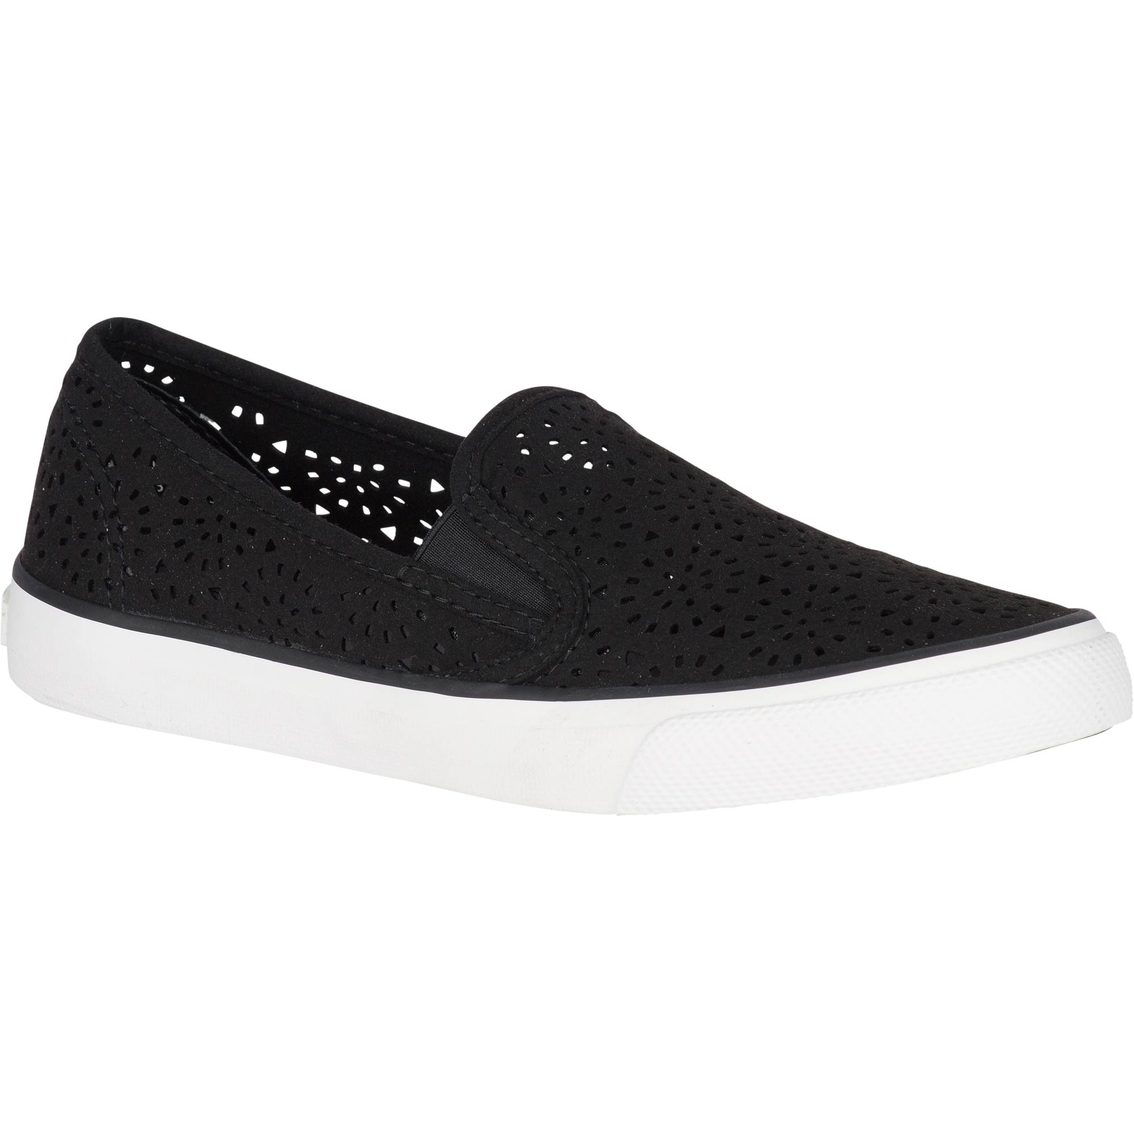 Sperry Women's Seaside Perforated 